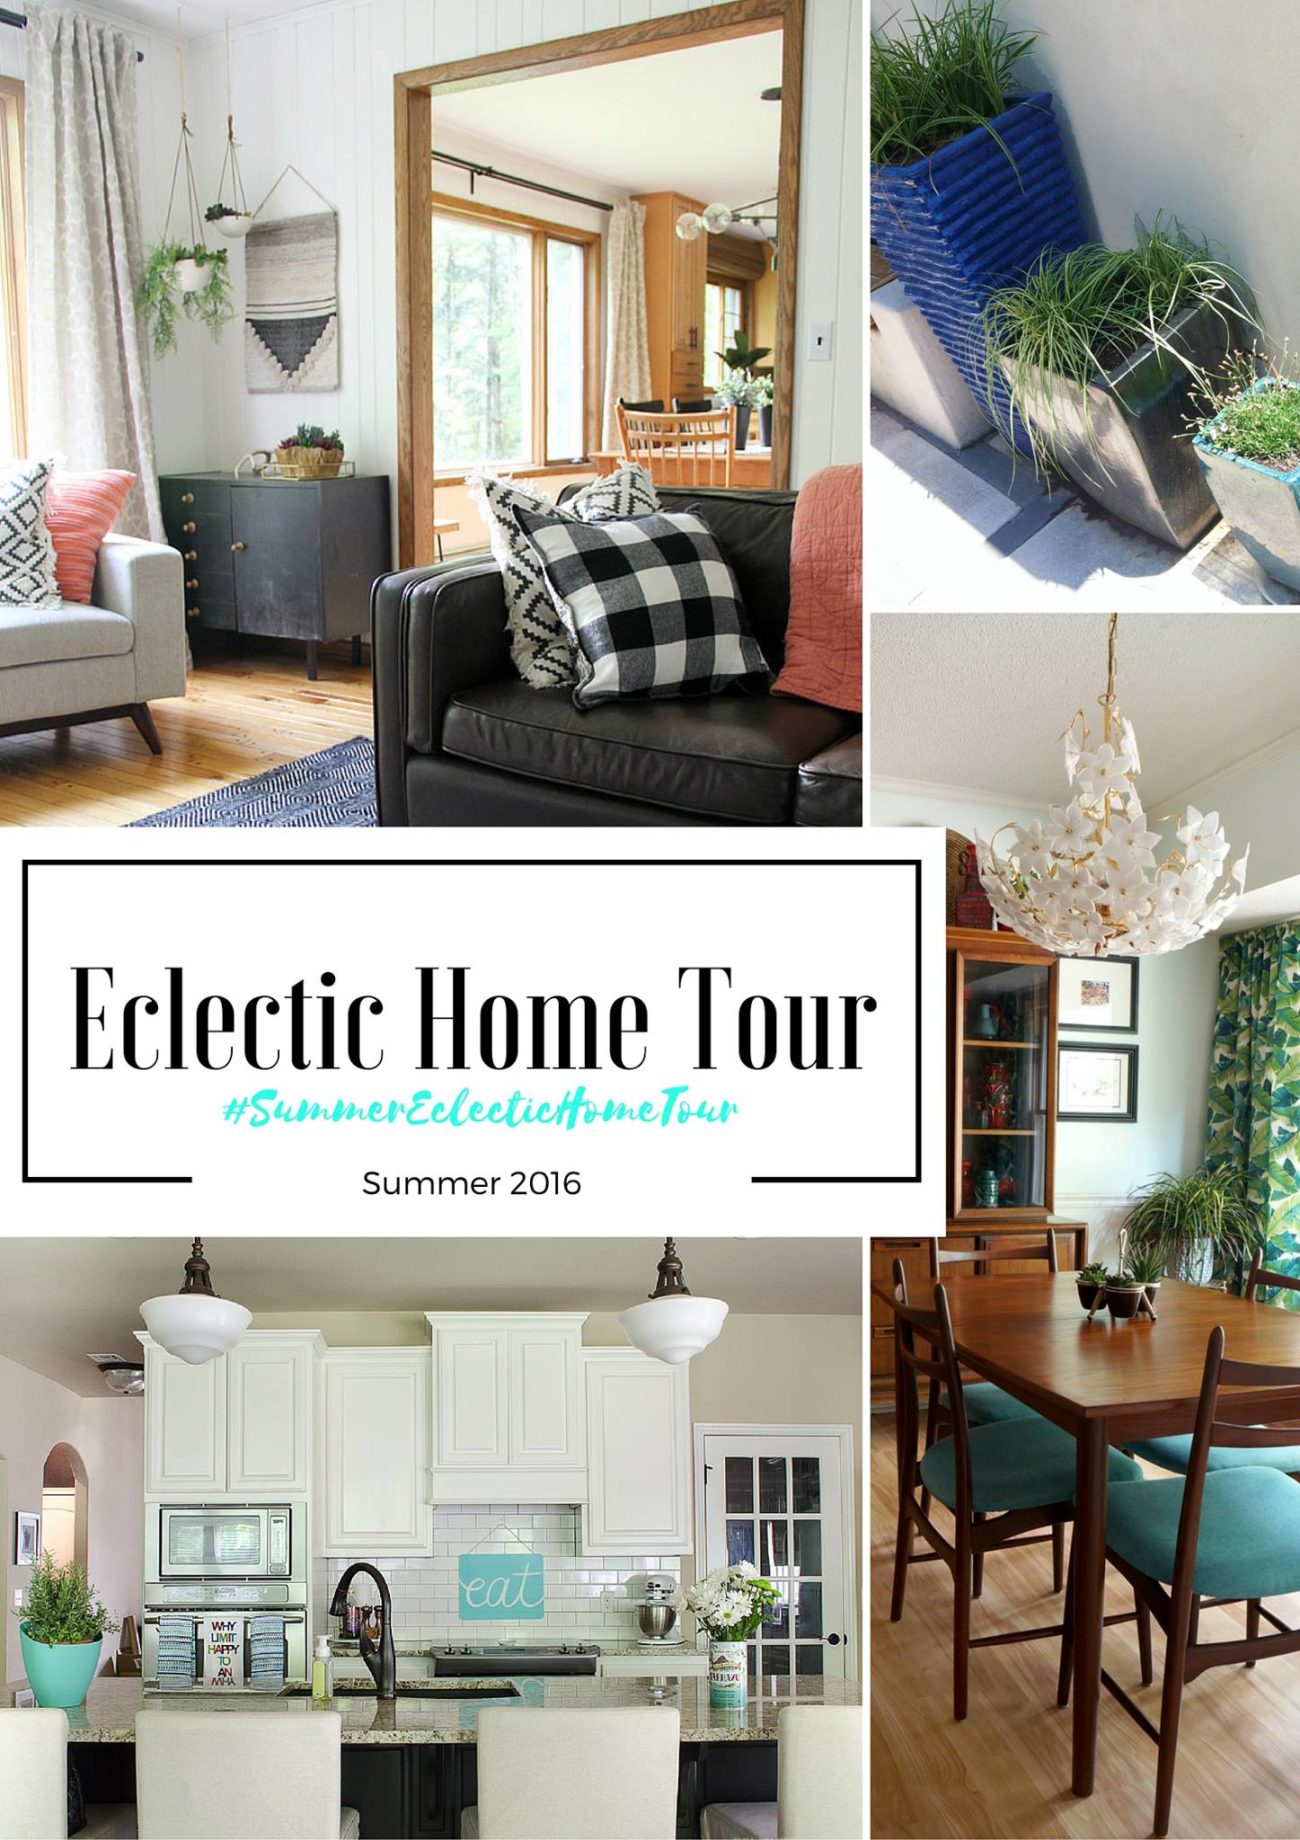 See how four bloggers decorate their homes for summer!